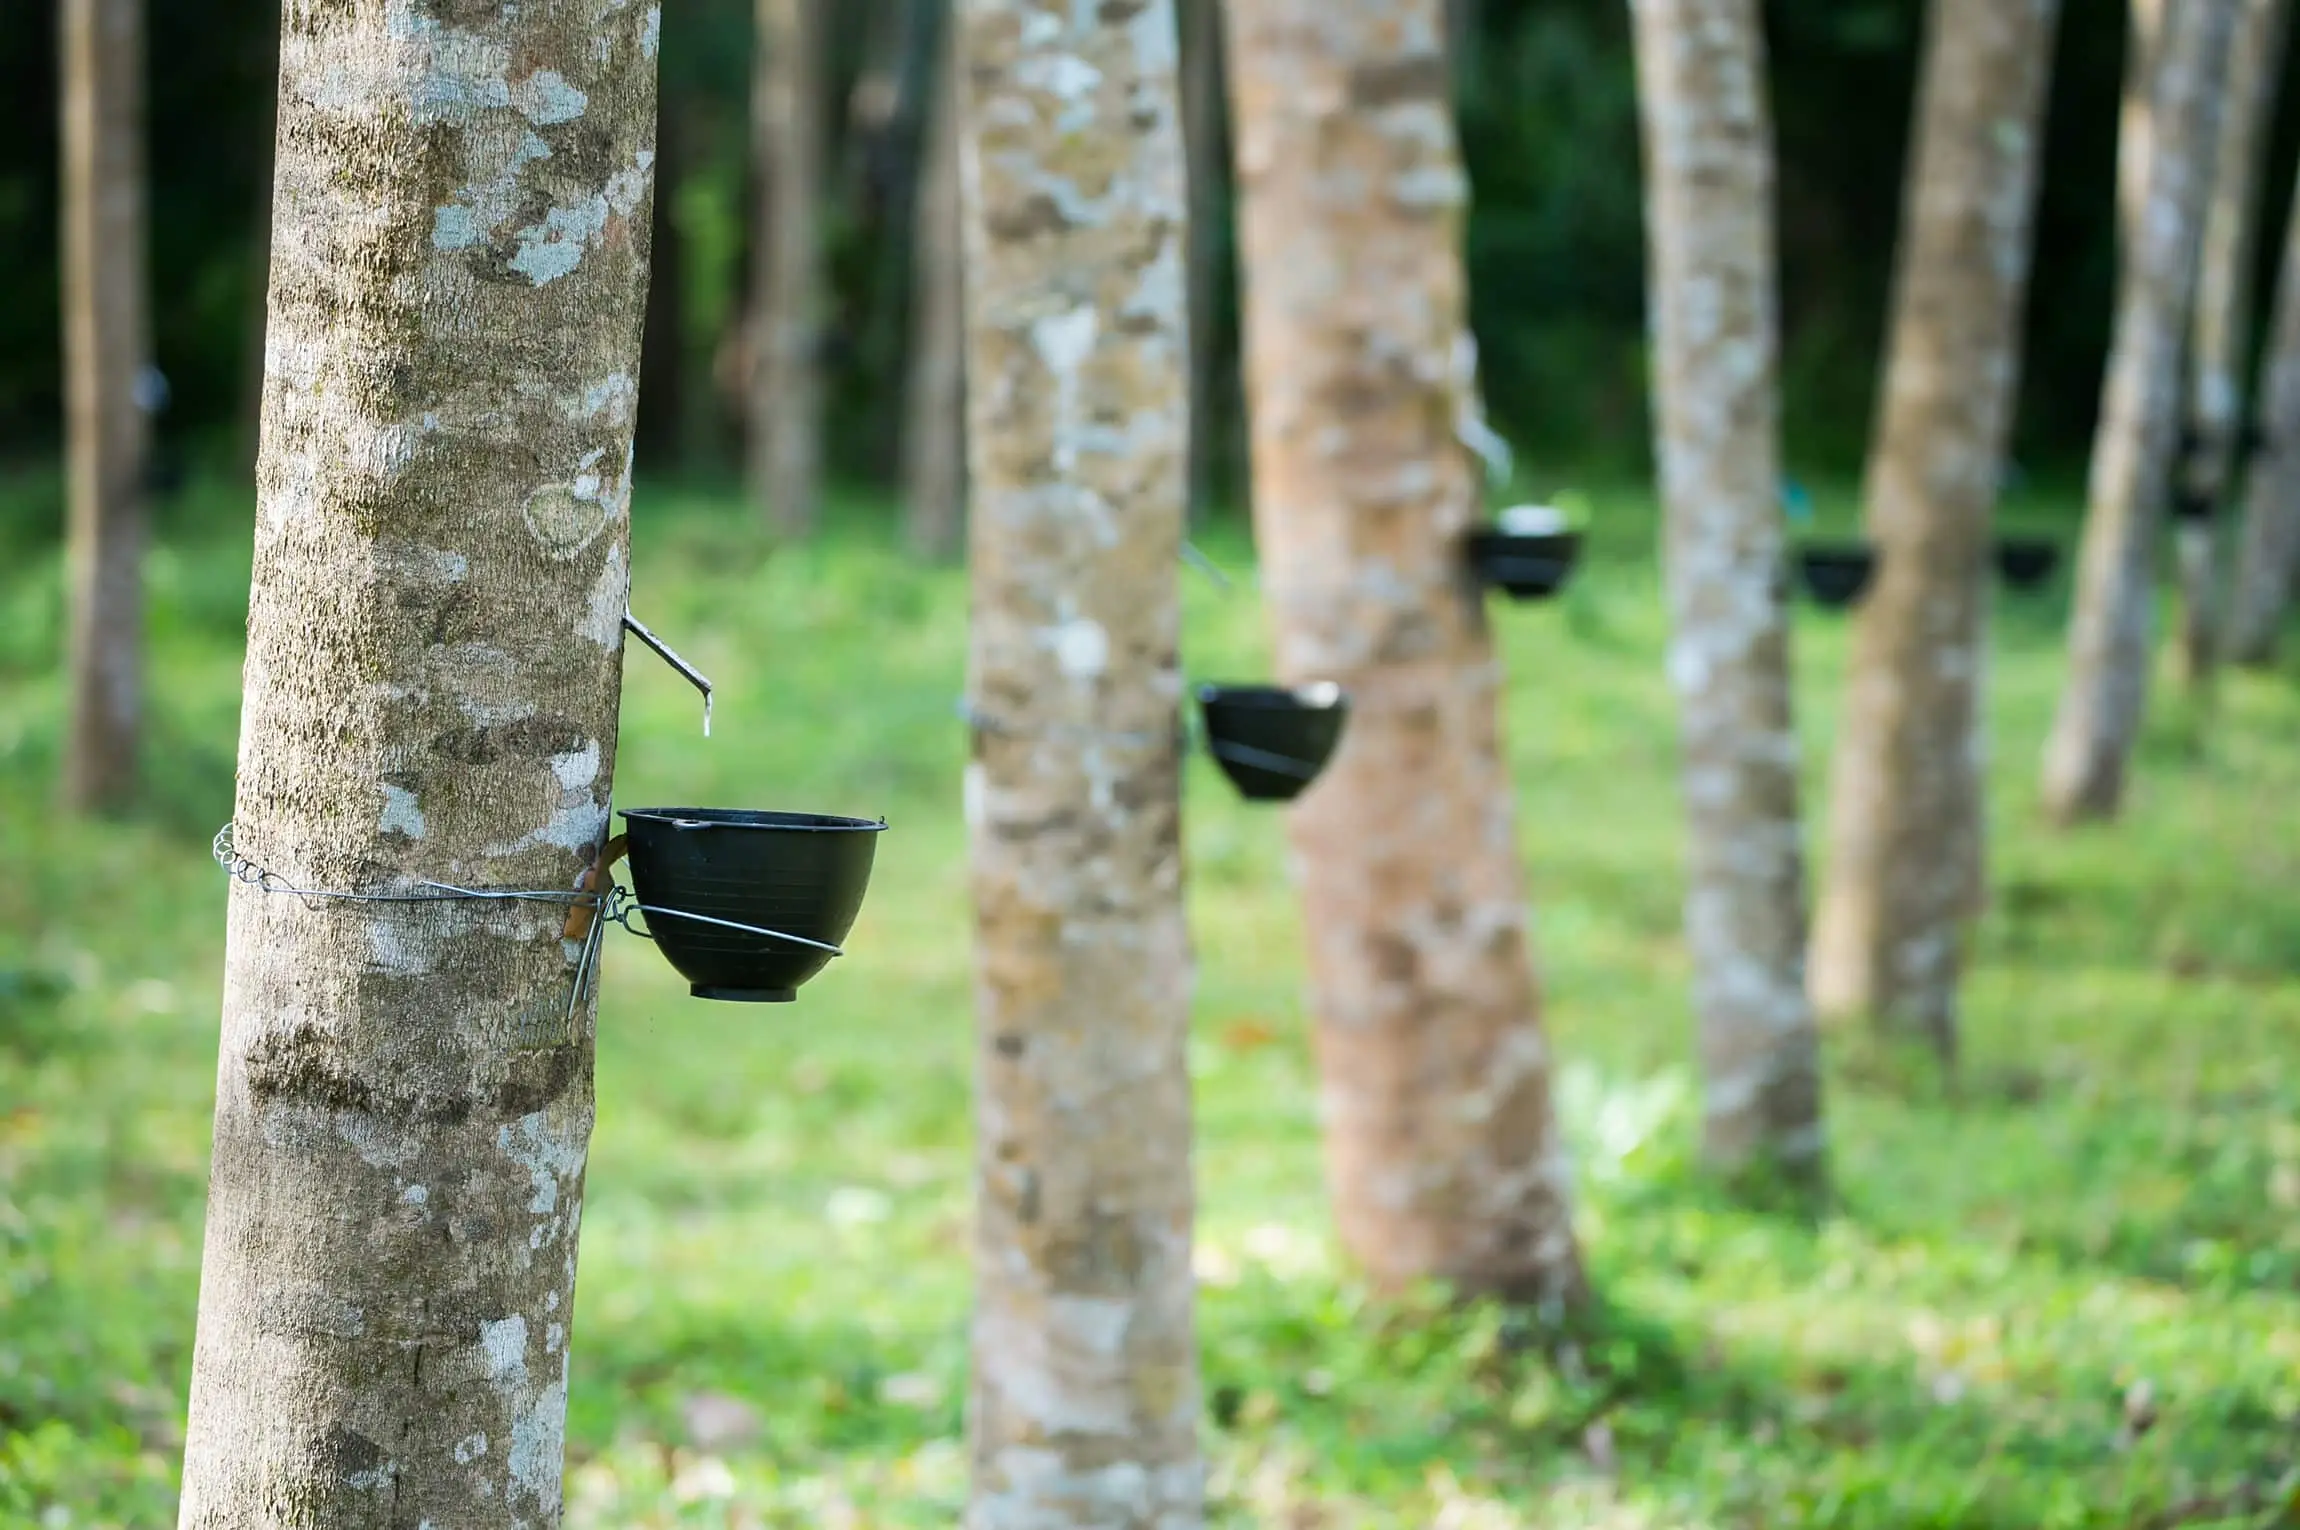 Production of our gloves start from rubber tree plantations found in Asia